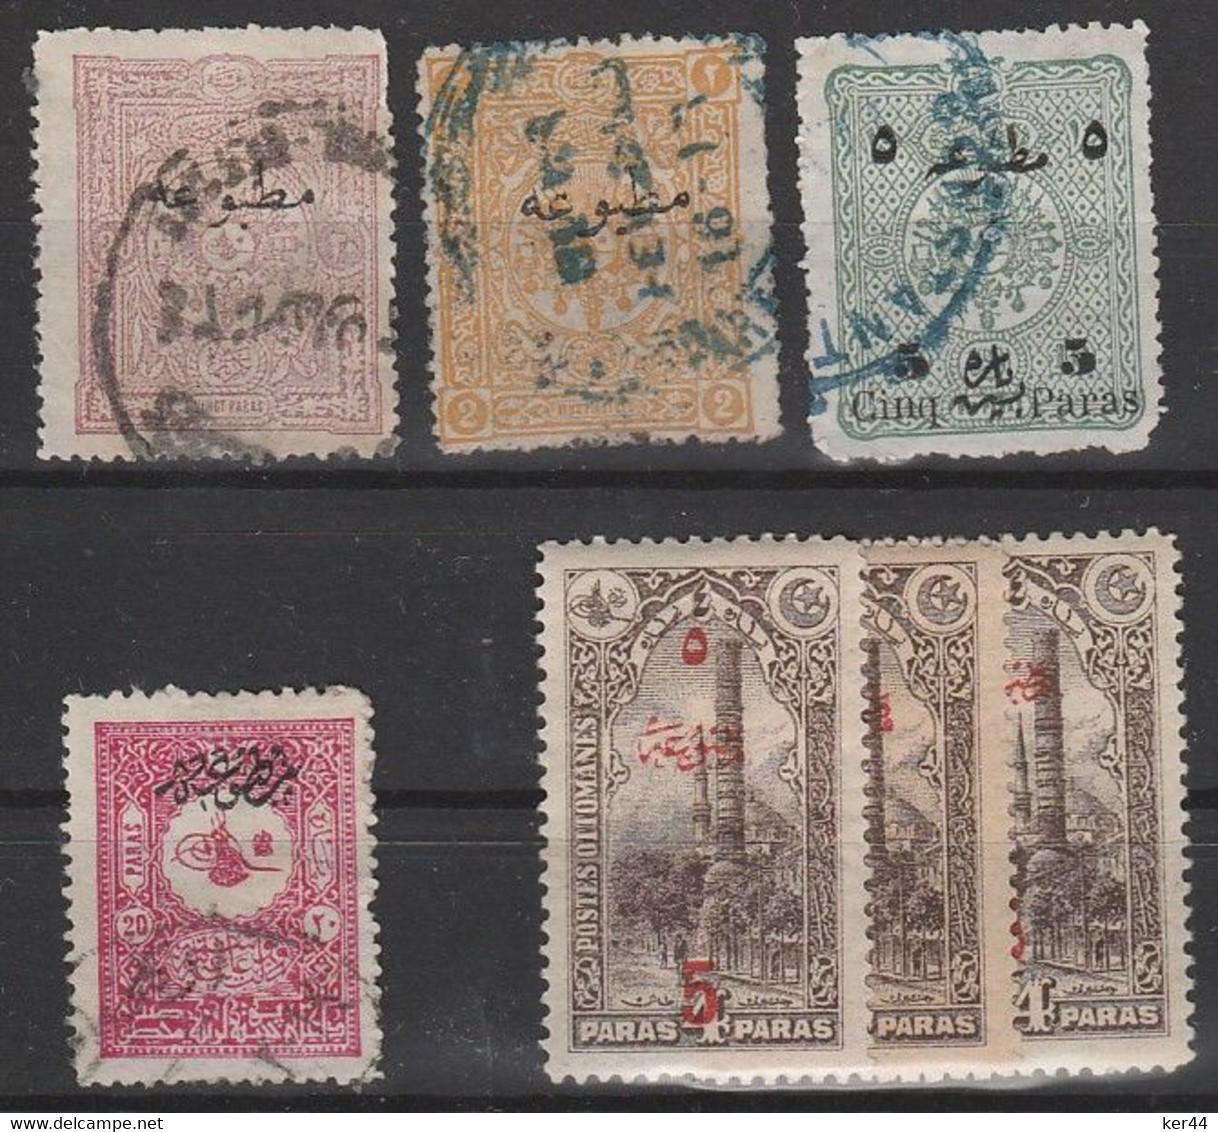 Journaux_Lot De 7 Timbres **/*/O -  Newspaper Stamps Lot_MNH/MH/USED - Timbres Pour Journaux